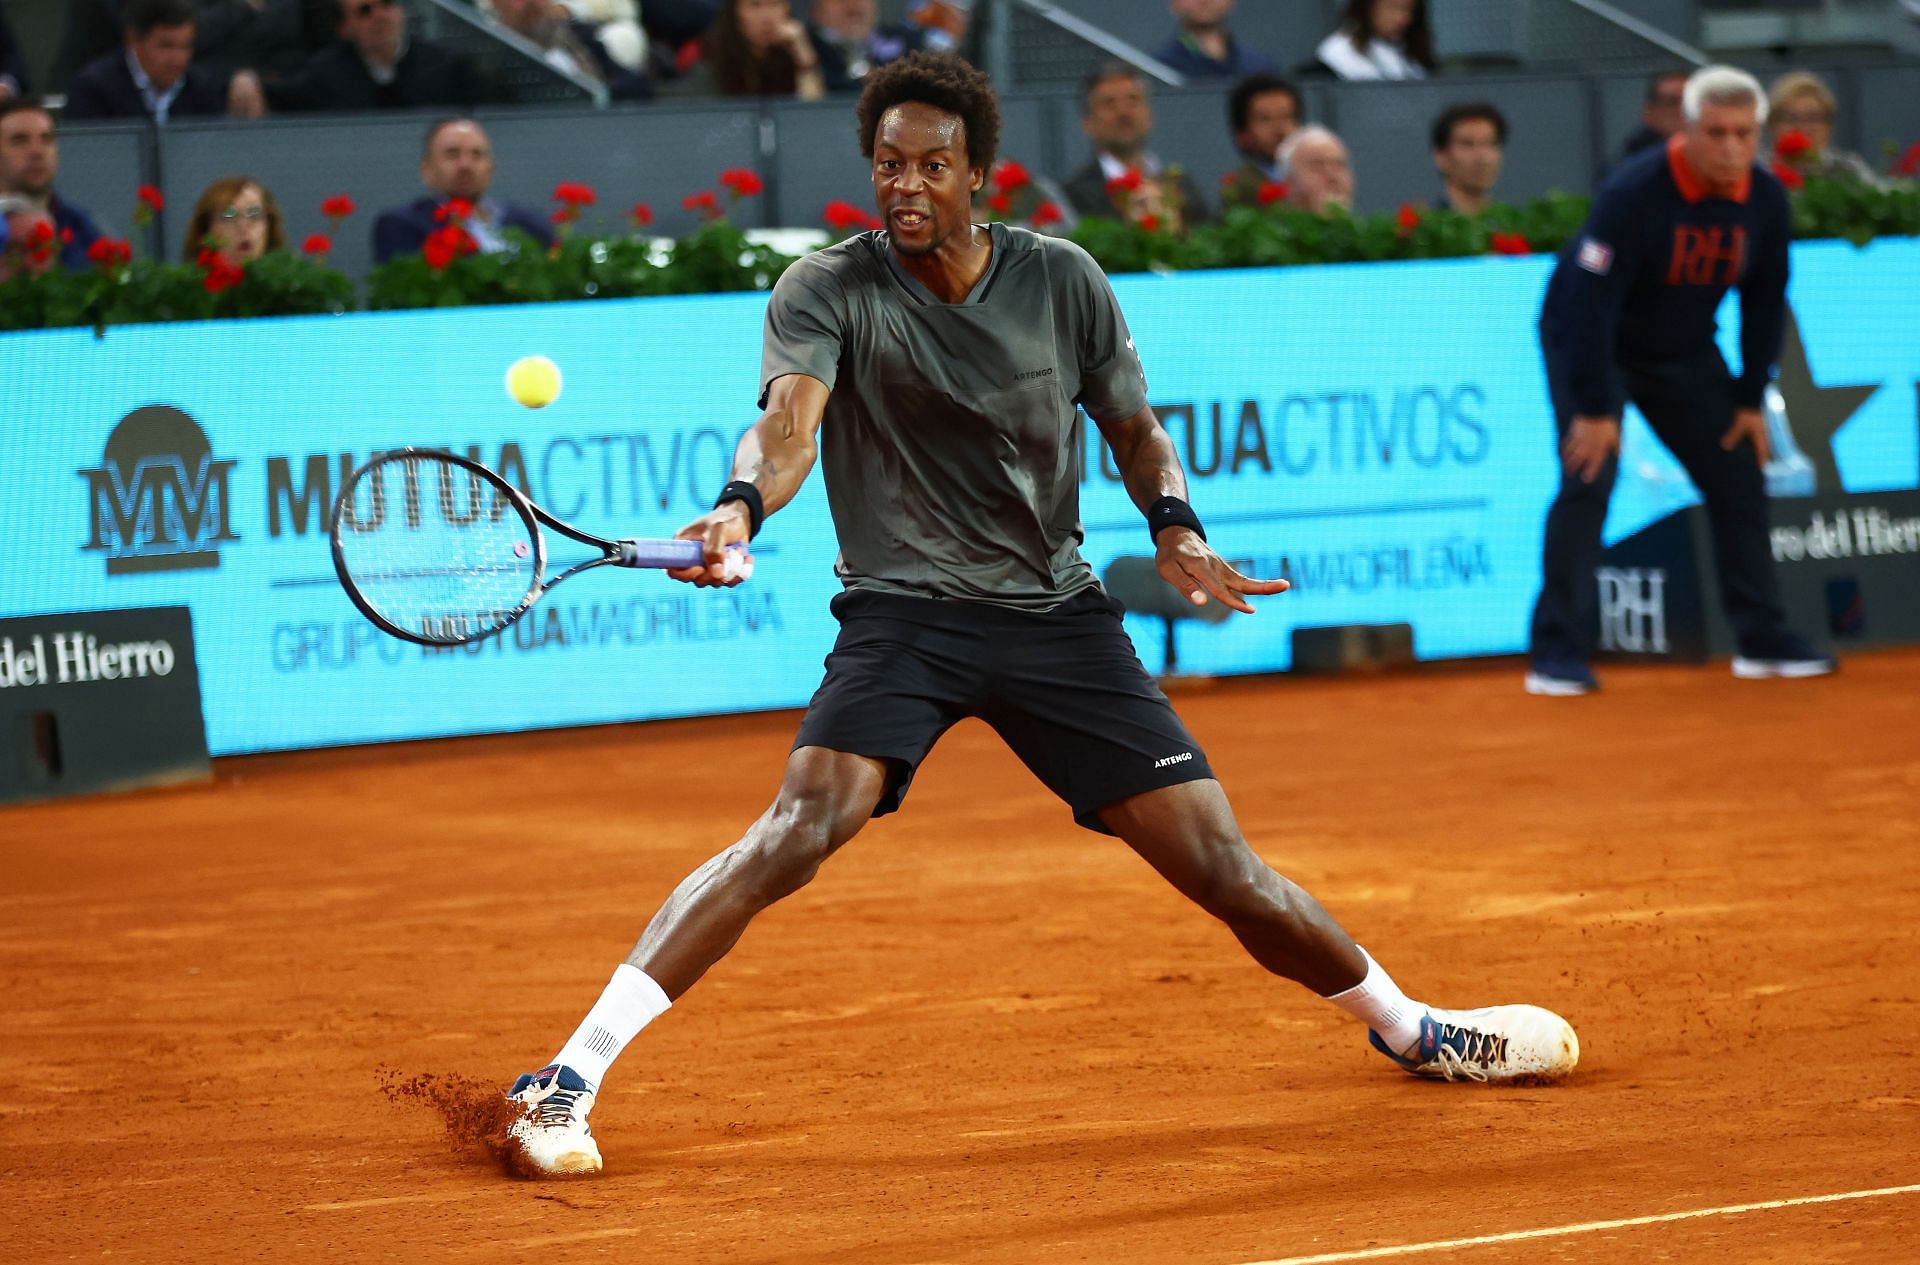 Gael Monfils slides as he plays a forehand during his second-round match against Novak Djokovic in Madrid.